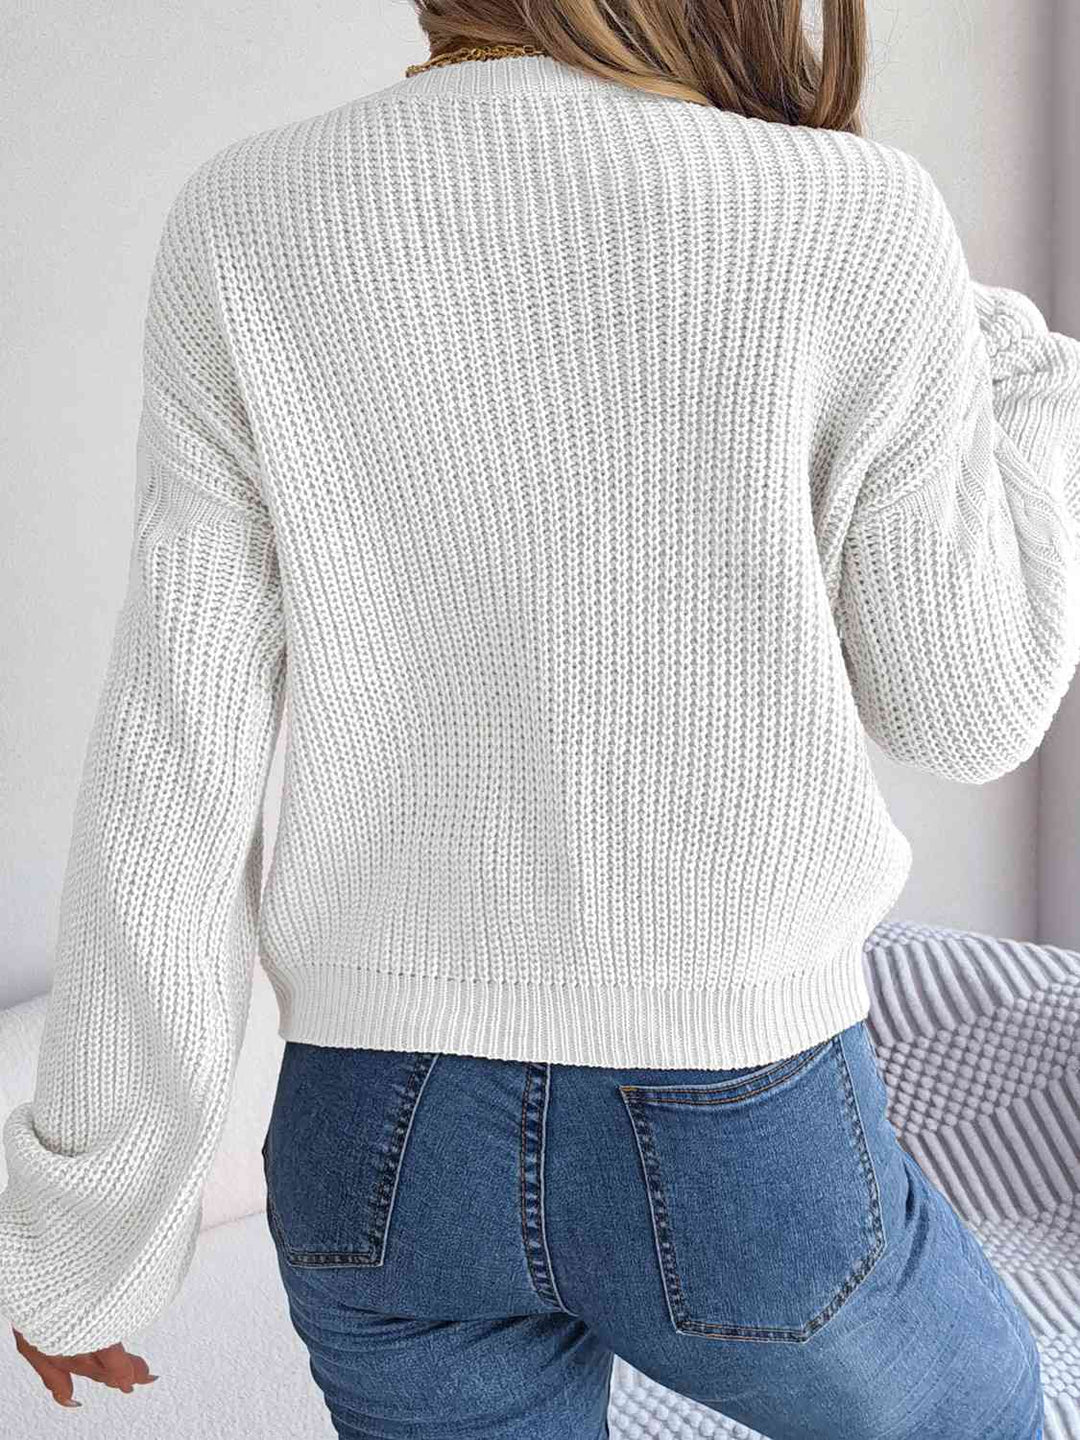 The802Gypsy sweater GYPSY-Cable Knit Sweater